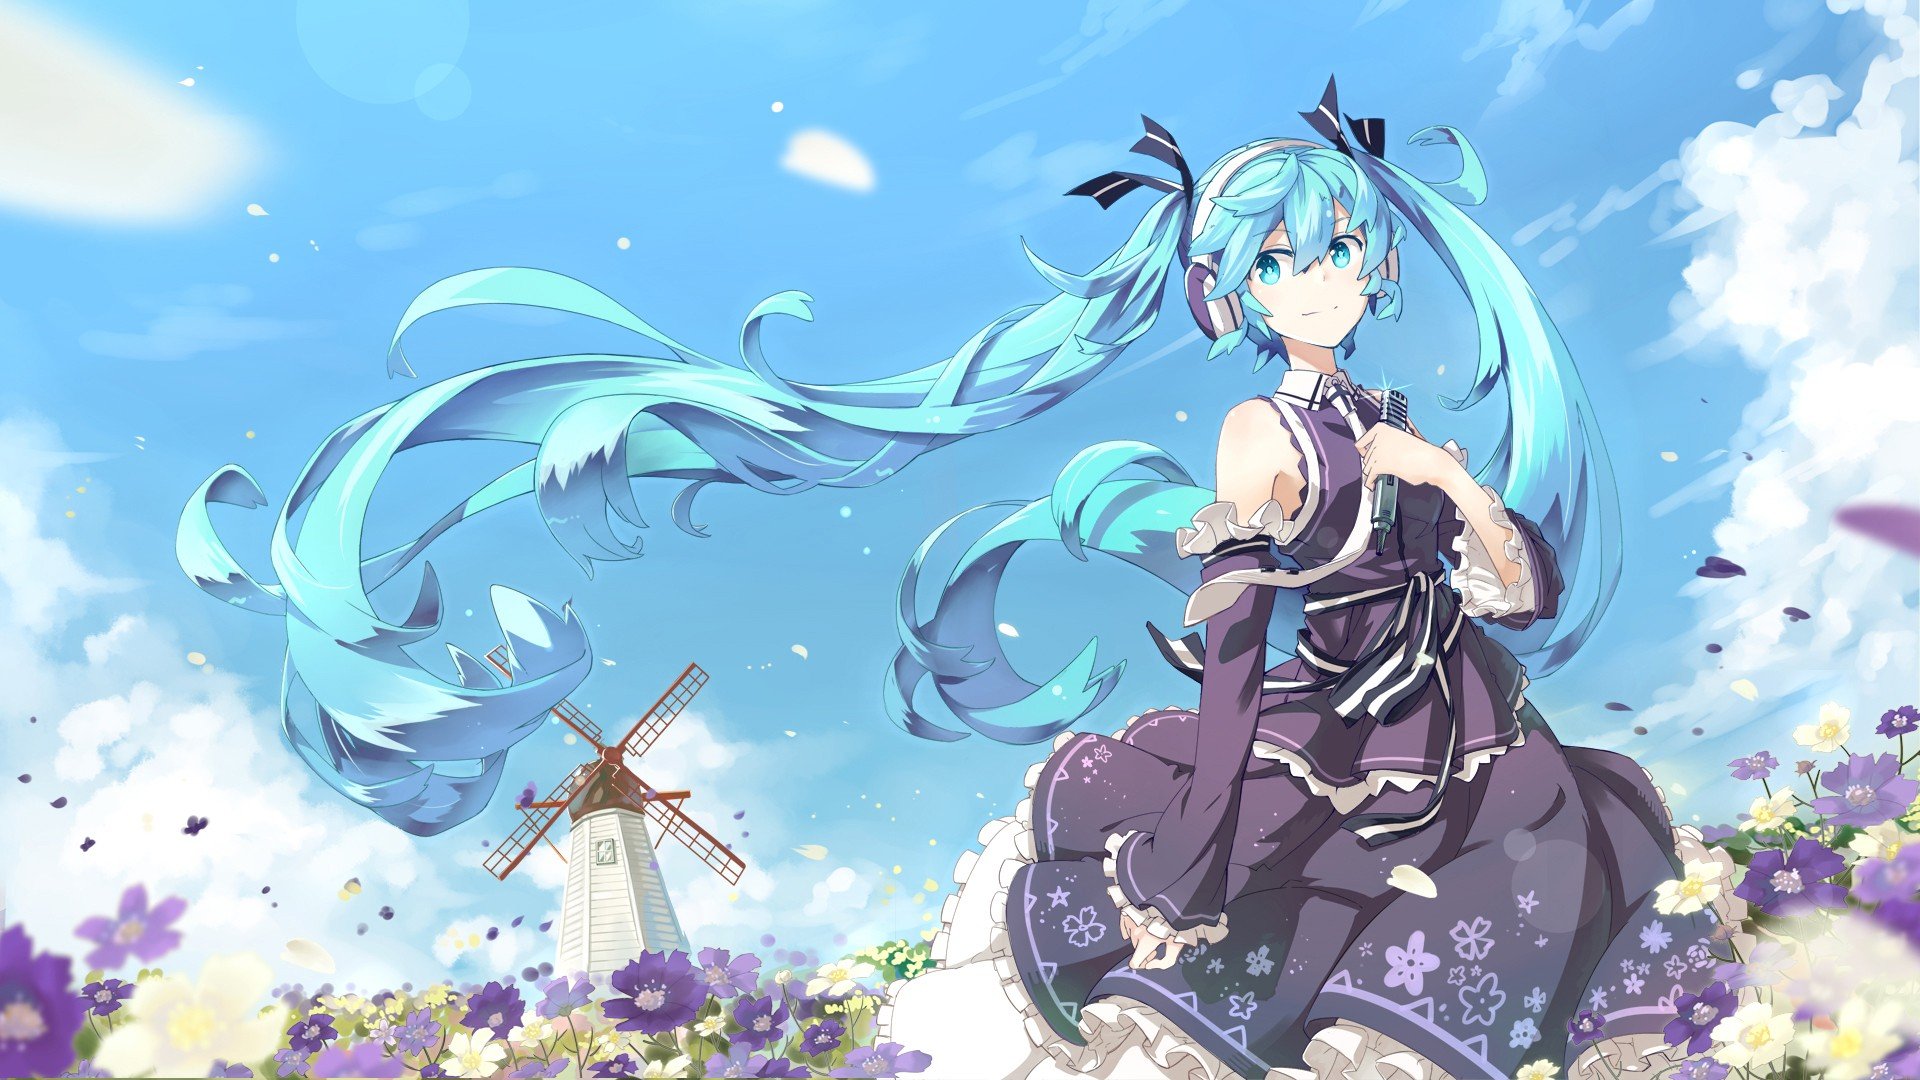 Anime Girls Vocaloid Hatsune Miku Wallpapers Hd Desktop And Mobile Backgrounds